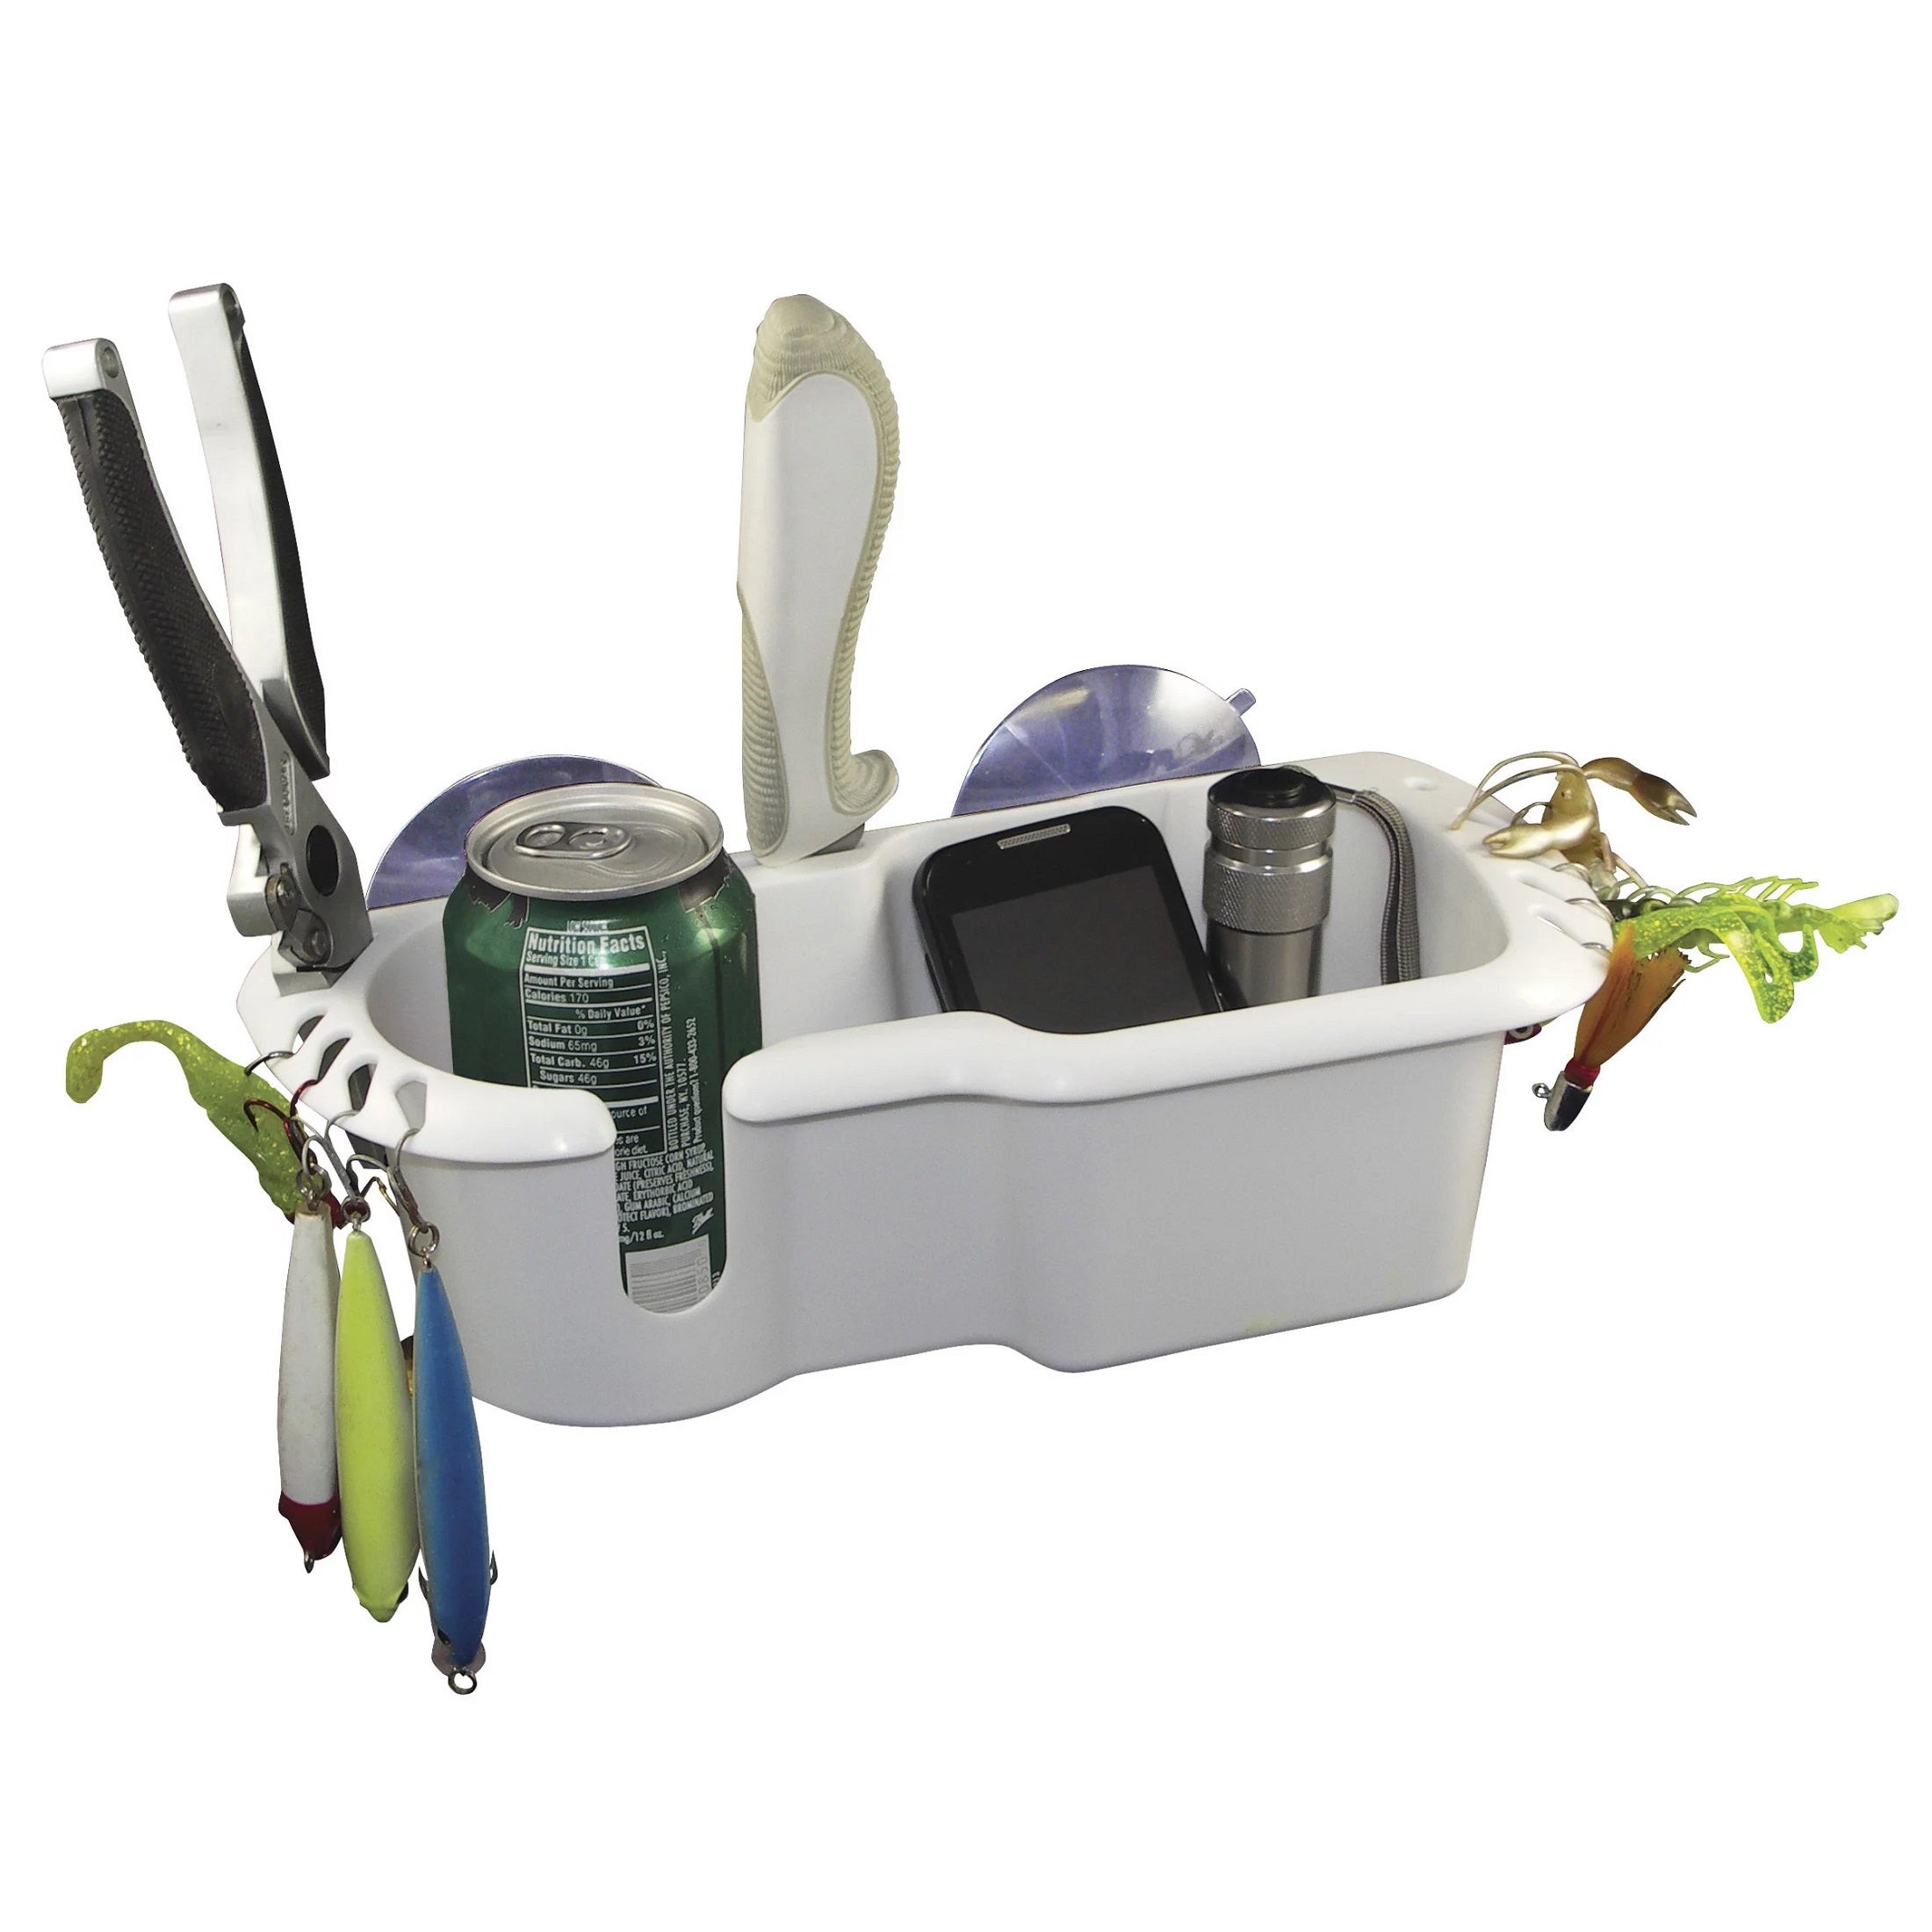 Suction Cup Boat Caddy